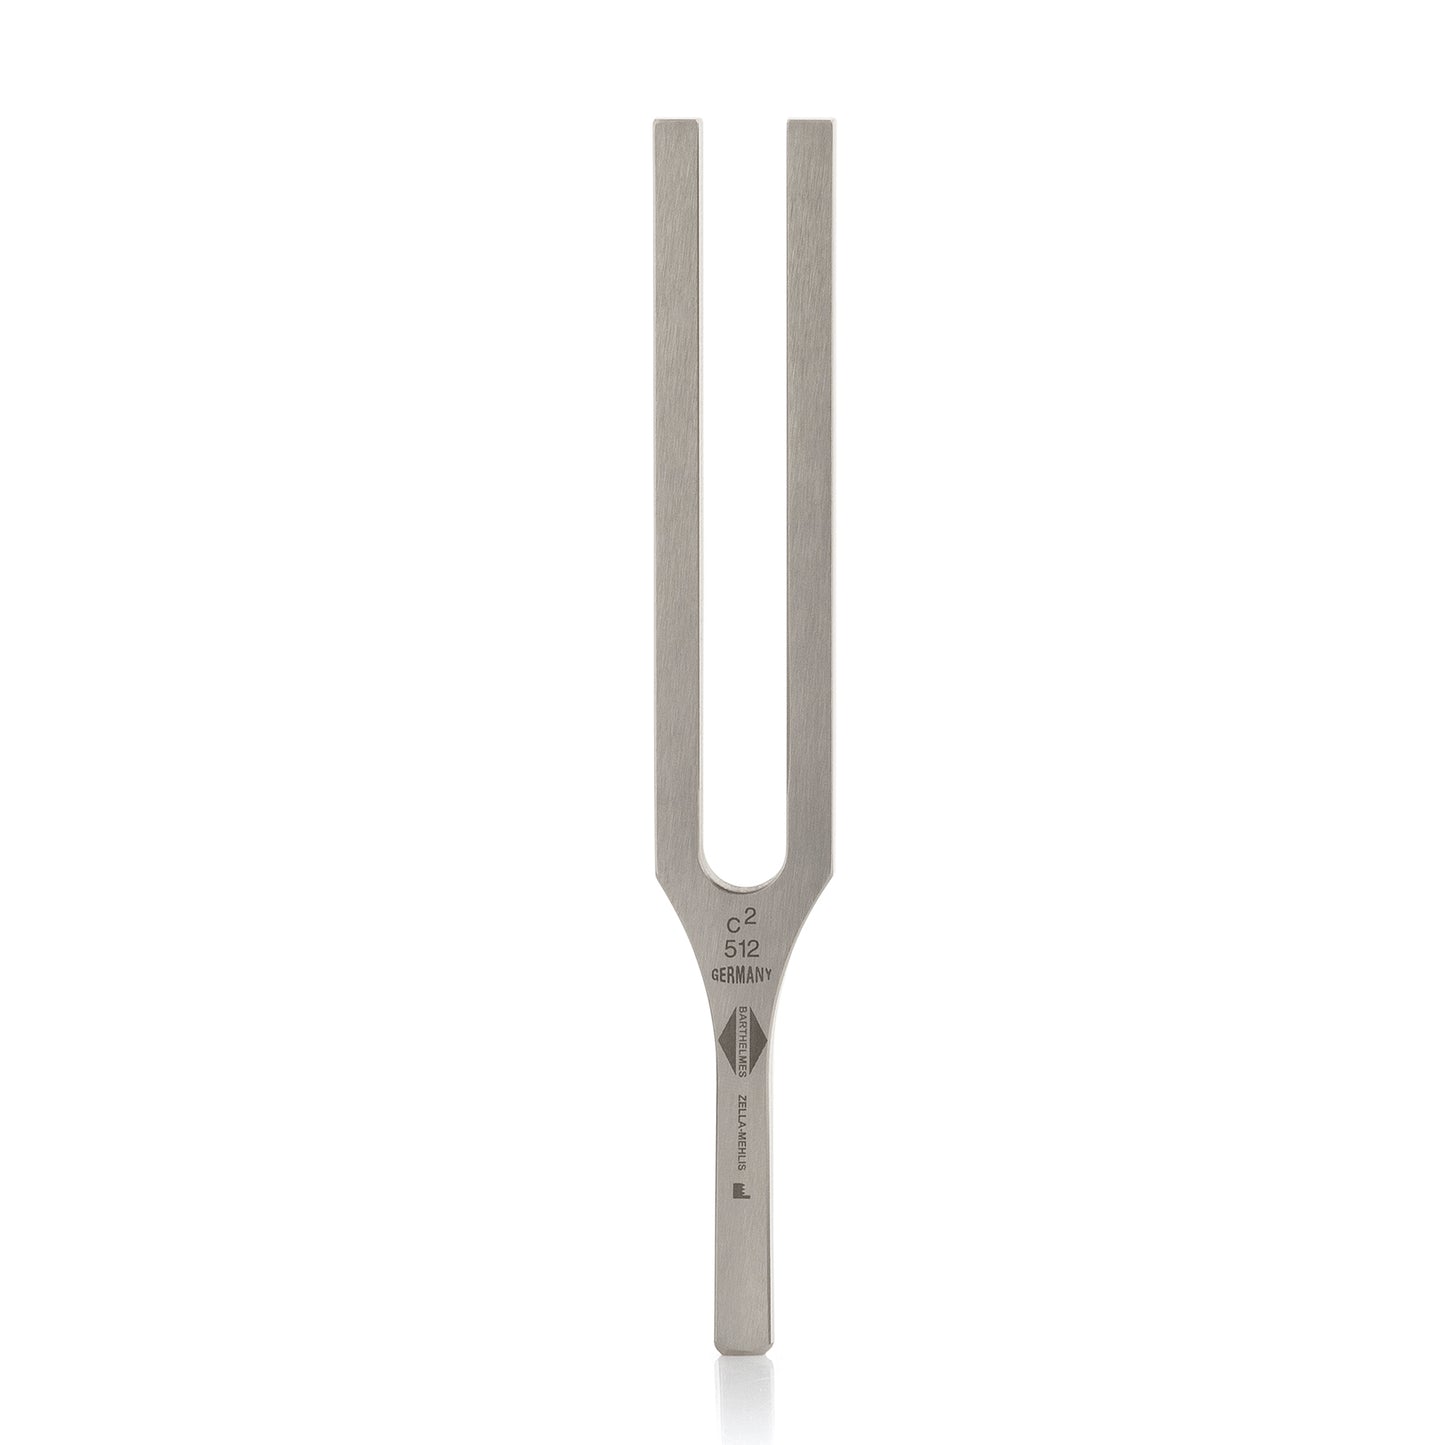 Barthelmes tuning fork c2 512 Hz for ear doctors according to Hartmann